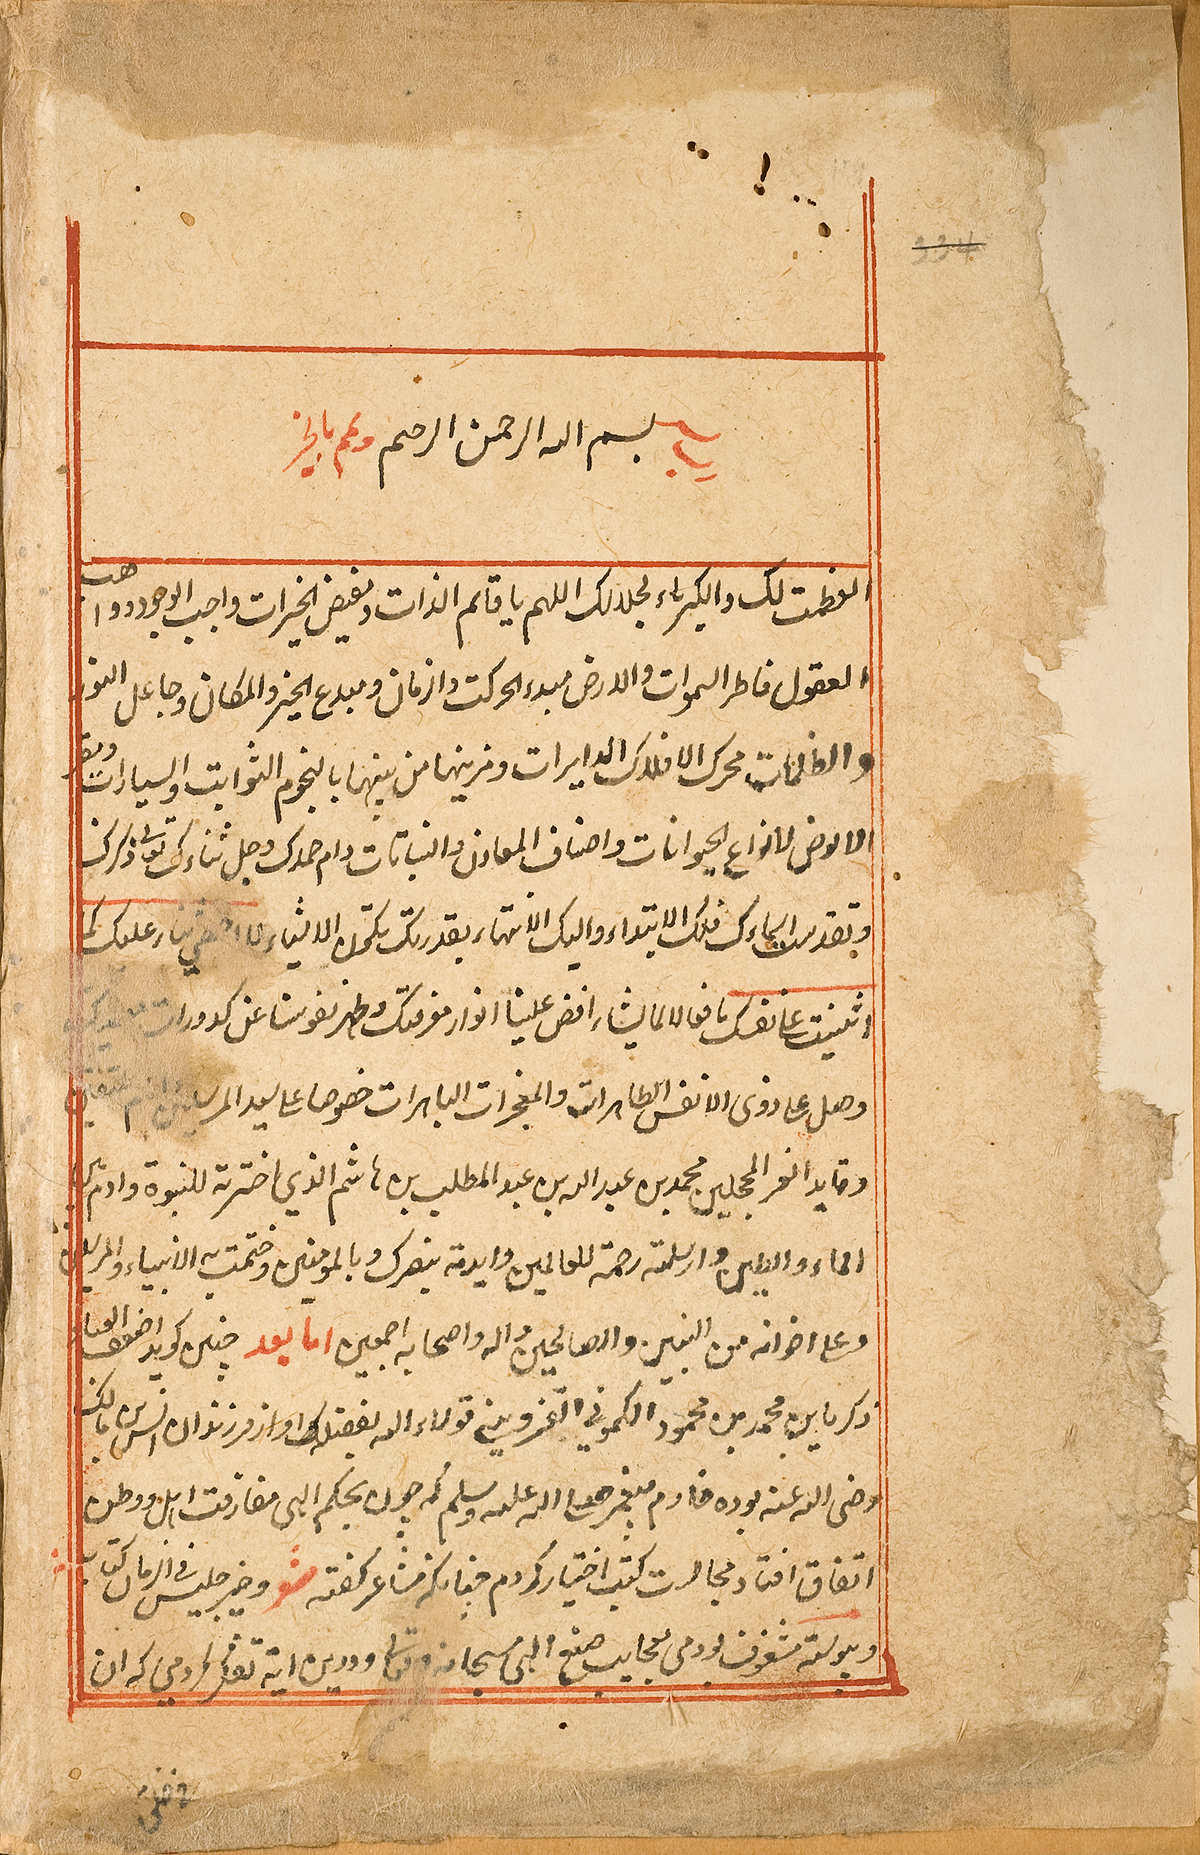 Opening invocation to Allah in Arabic, inside a red double ruled border, beginning with the text, 'In the Name of God, the Compassionate, the Merciful. Praise the Lord, and He is the creator of human beings, animals, and the stars. He (the Lord) also added metals and plants. In the hands of the Lord are the beginning and ending of everything, and He is able to compose things.  Praise to the prophet Muhammad ibn ‘Abd al-Muttalib whom you selected for prophecy and you sent as a blessing to the world.'